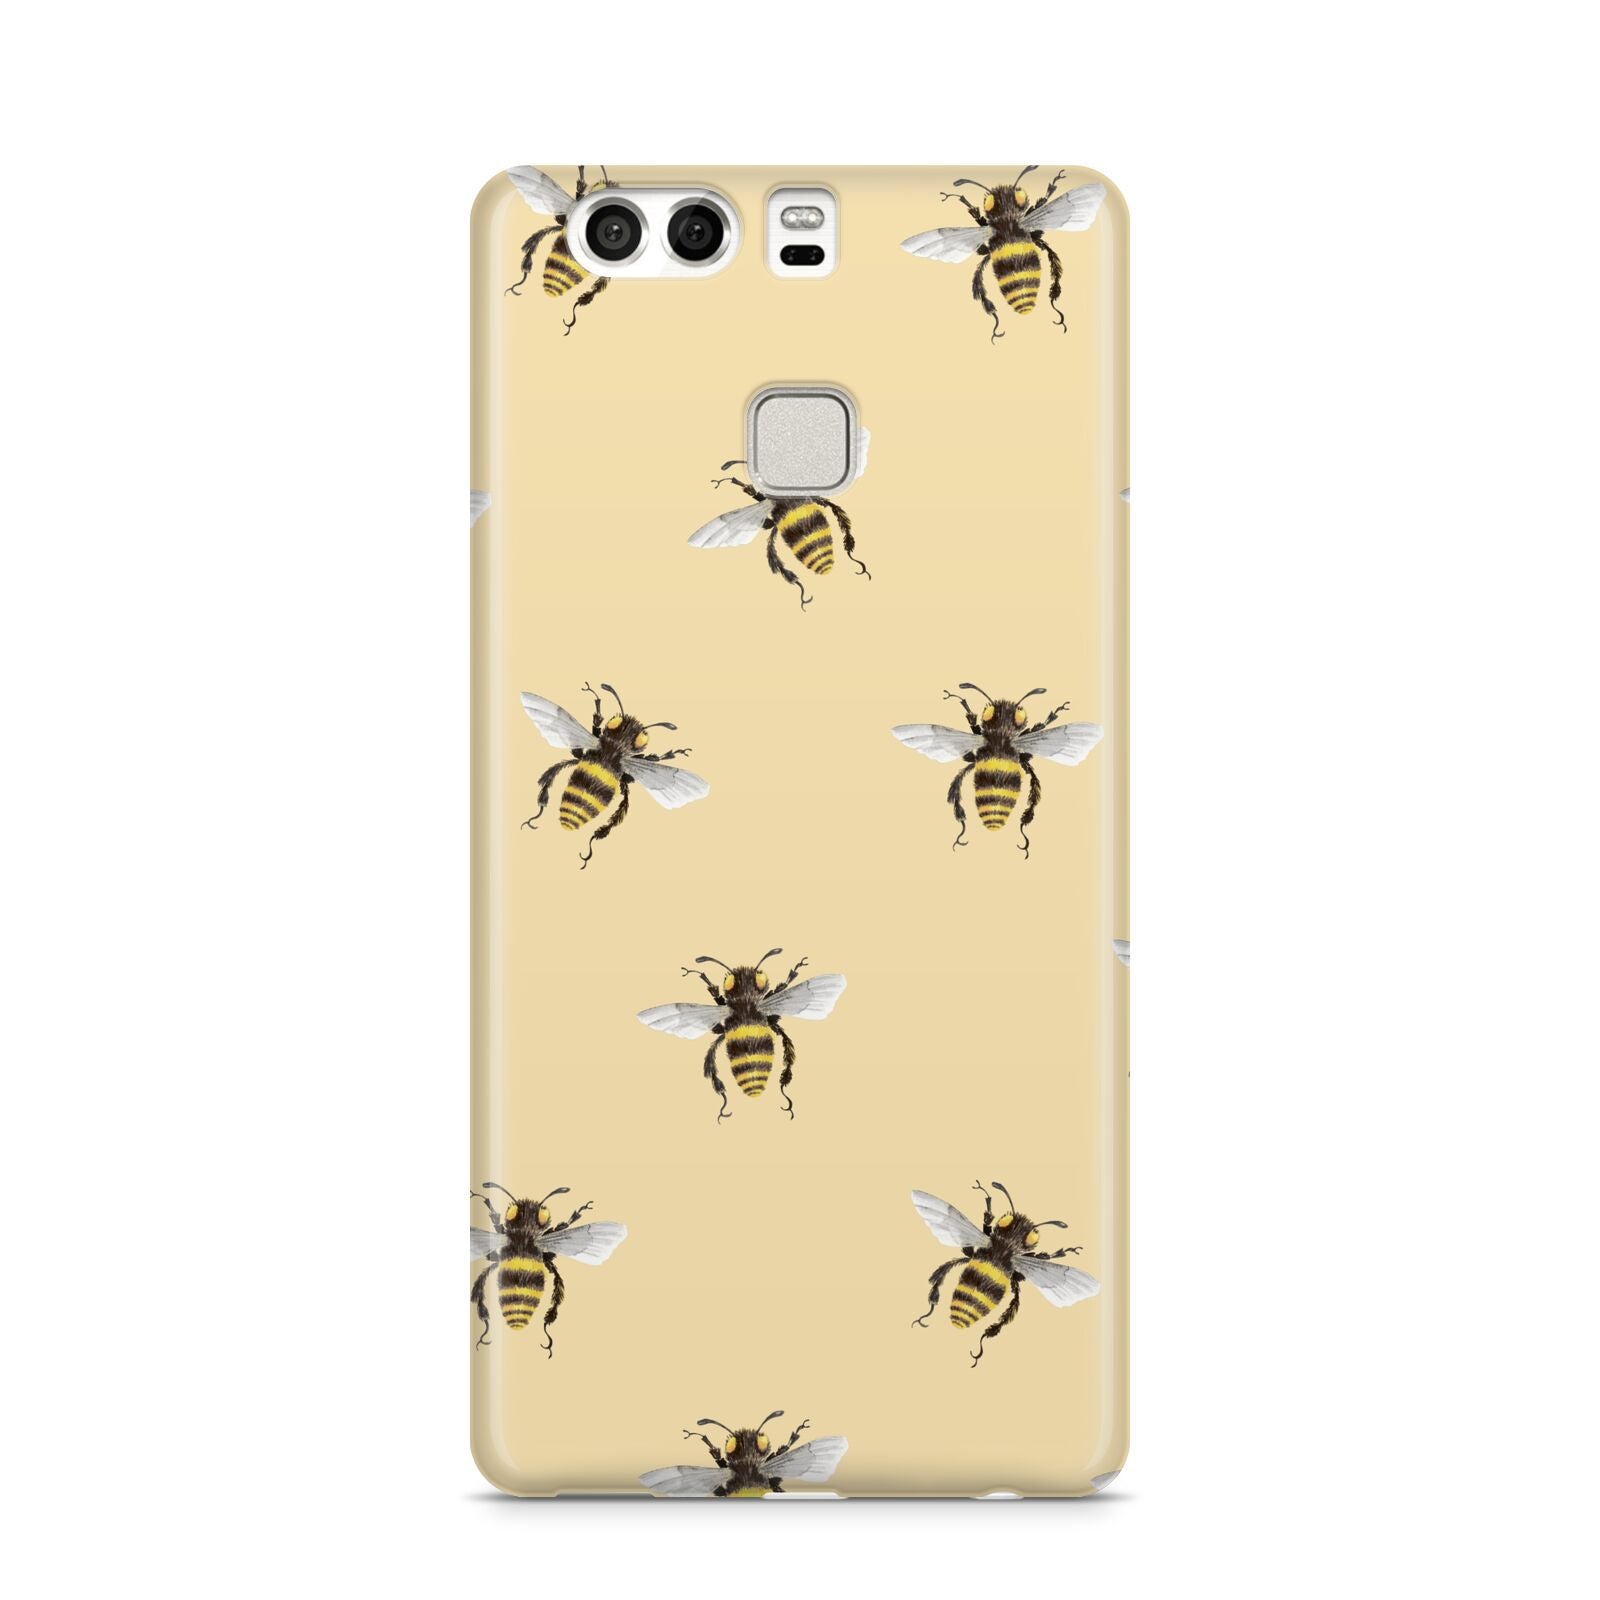 Bee Illustrations Huawei P9 Case